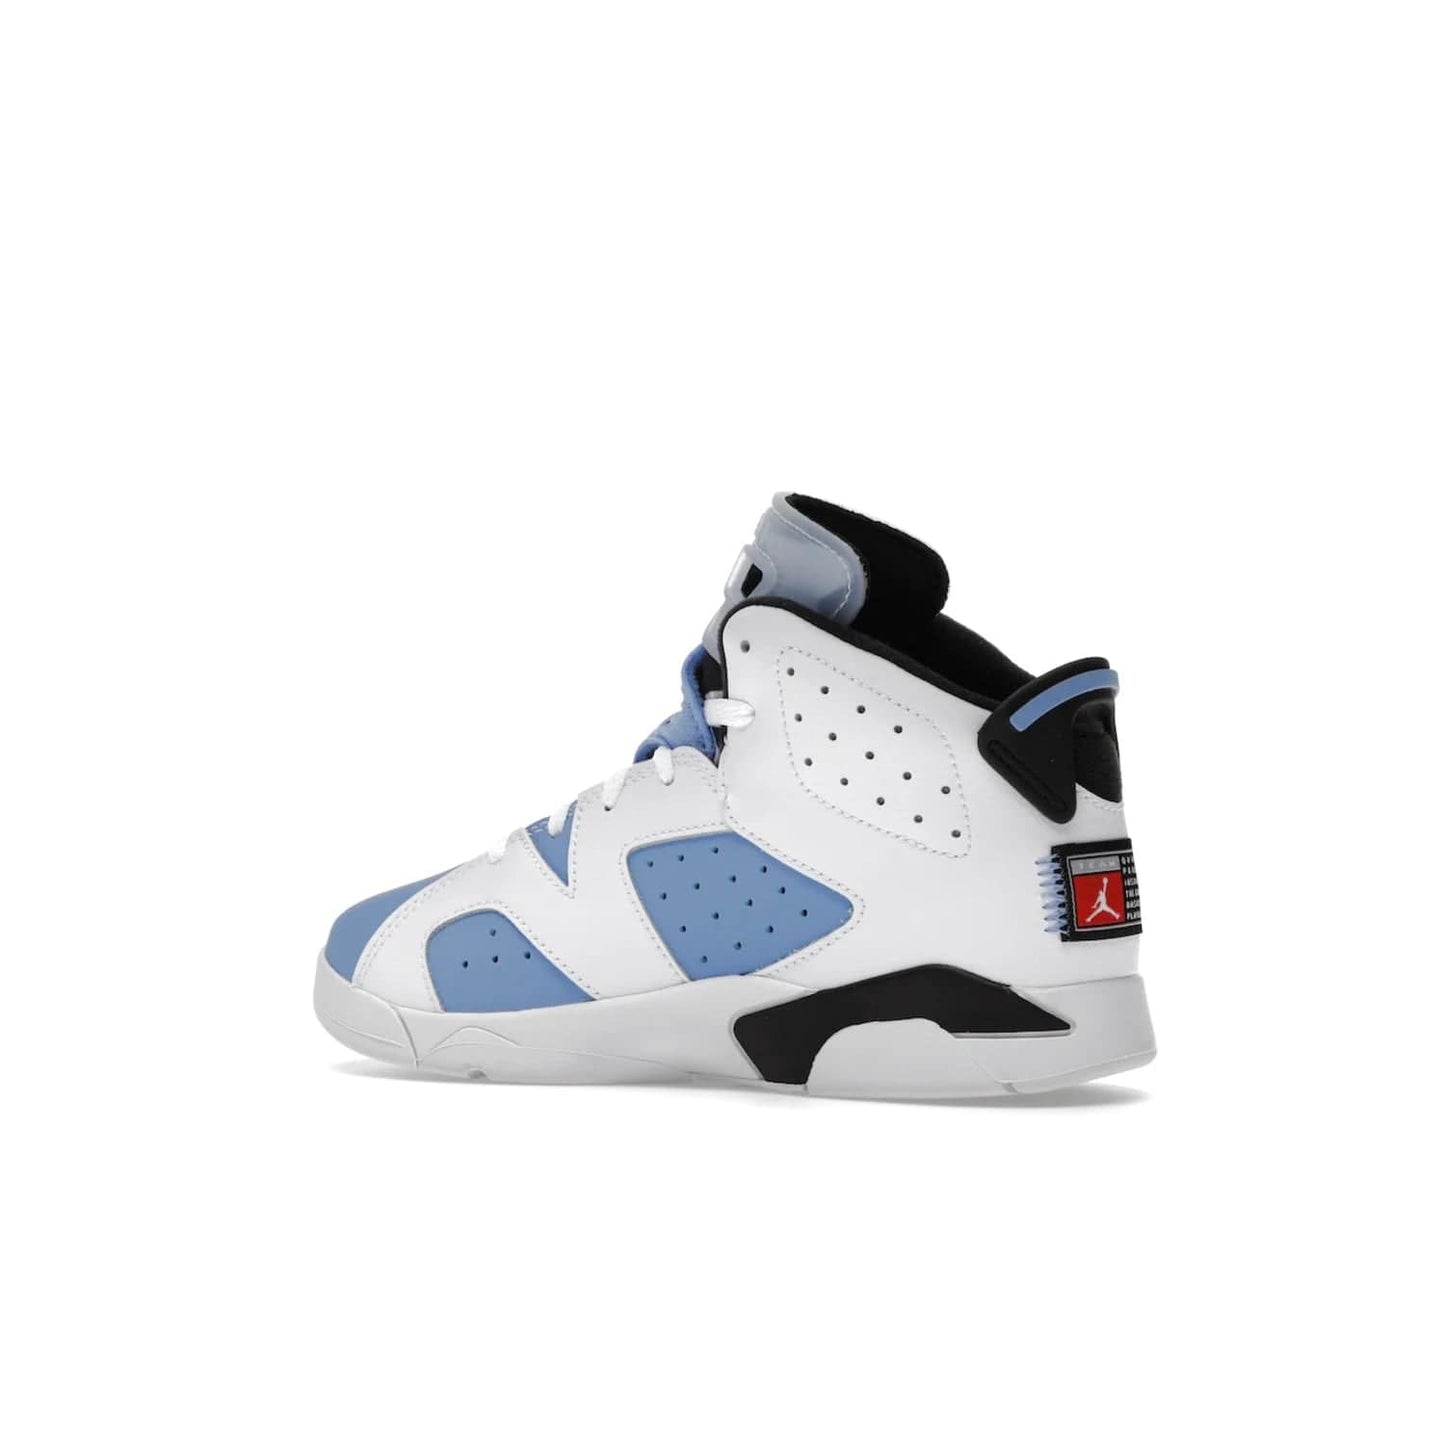 Jordan 6 Retro UNC White (PS) - Image 22 - Only at www.BallersClubKickz.com - The Air Jordan 6 Retro UNC White PS celebrates Michael Jordan's alma mater, the University of North Carolina. It features a classic color-blocking of the iconic Jordan 6 Carmine and a stitched Jordan Team patch. This must-have sneaker released on April 27th, 2022. Referencing the university colors, get this shoe for a stylish and timeless style with university pride.